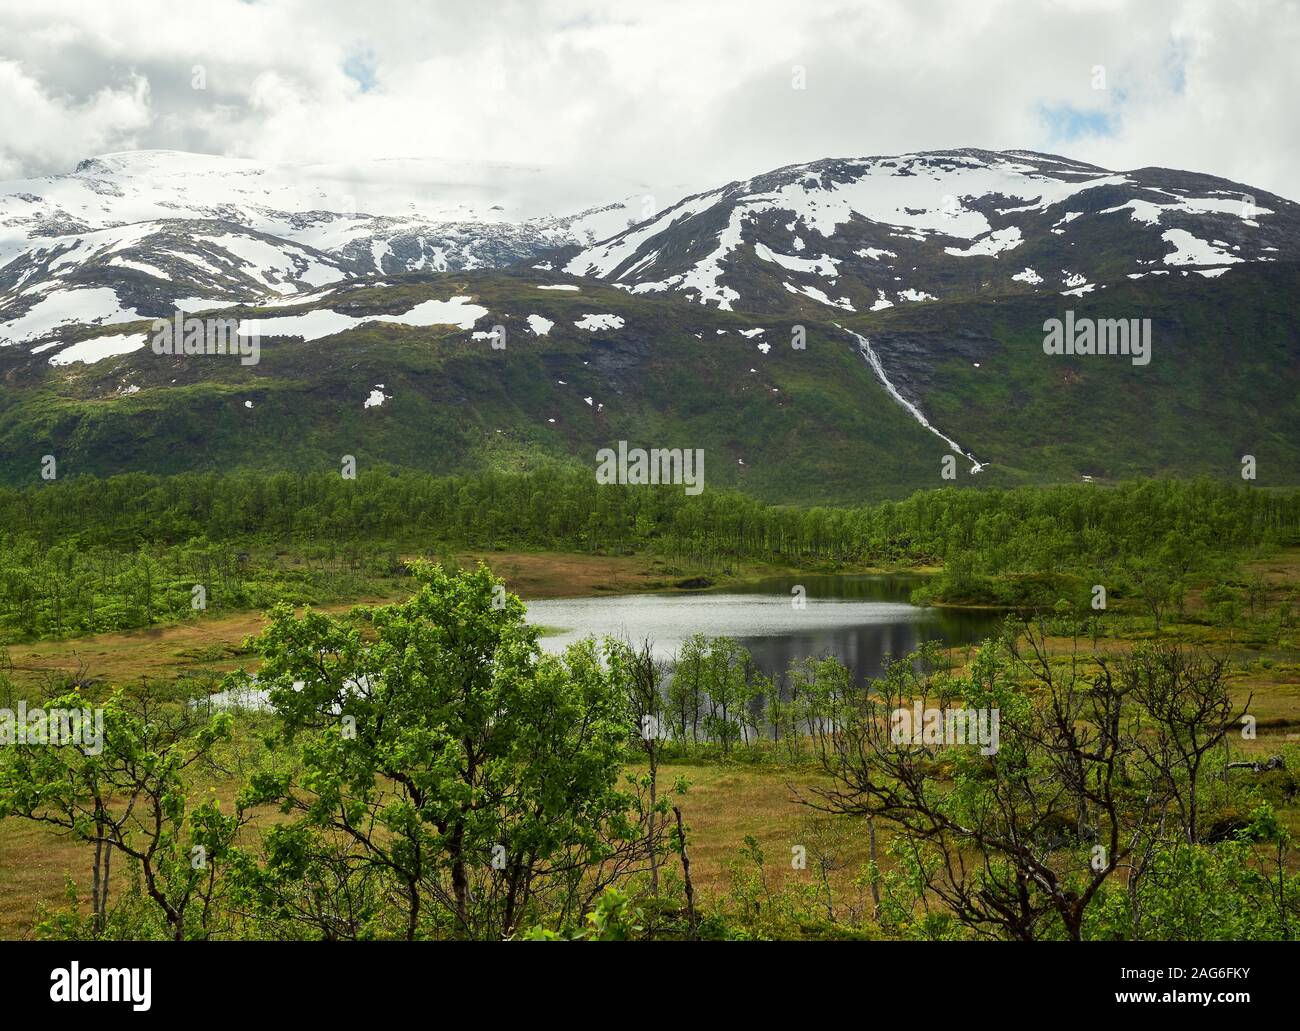 Northern summer landscape with mountains, forest at the foreground and mountain peak on the background. Senja Island, Troms County, Norway. Stock Photo